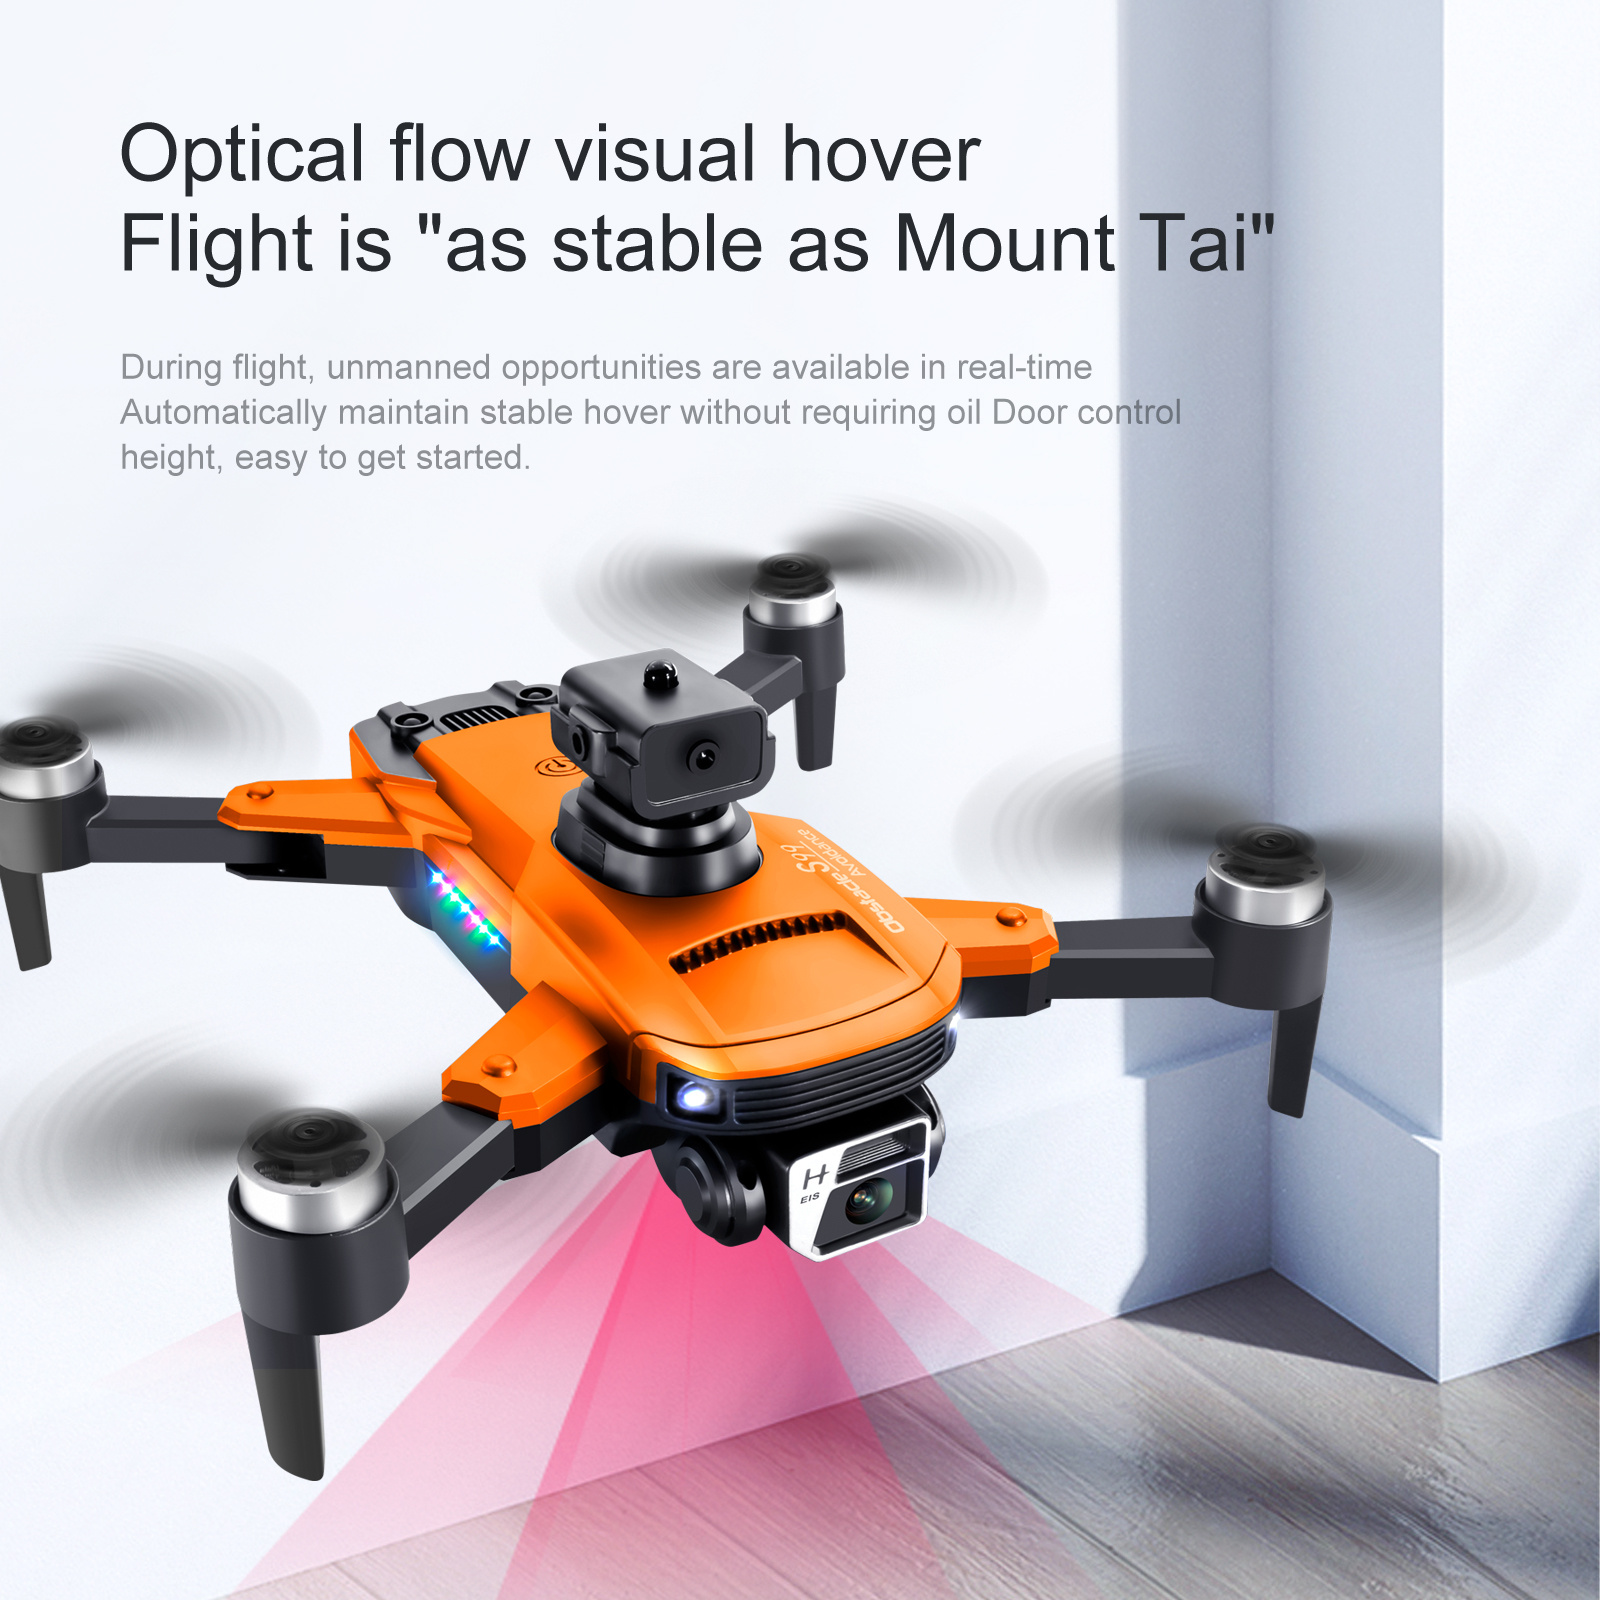 paxa s99 5g gps drone led colored lights hd real time aerial photography obstacle avoidance quadrotor helicopter rc distance 100m uav details 14